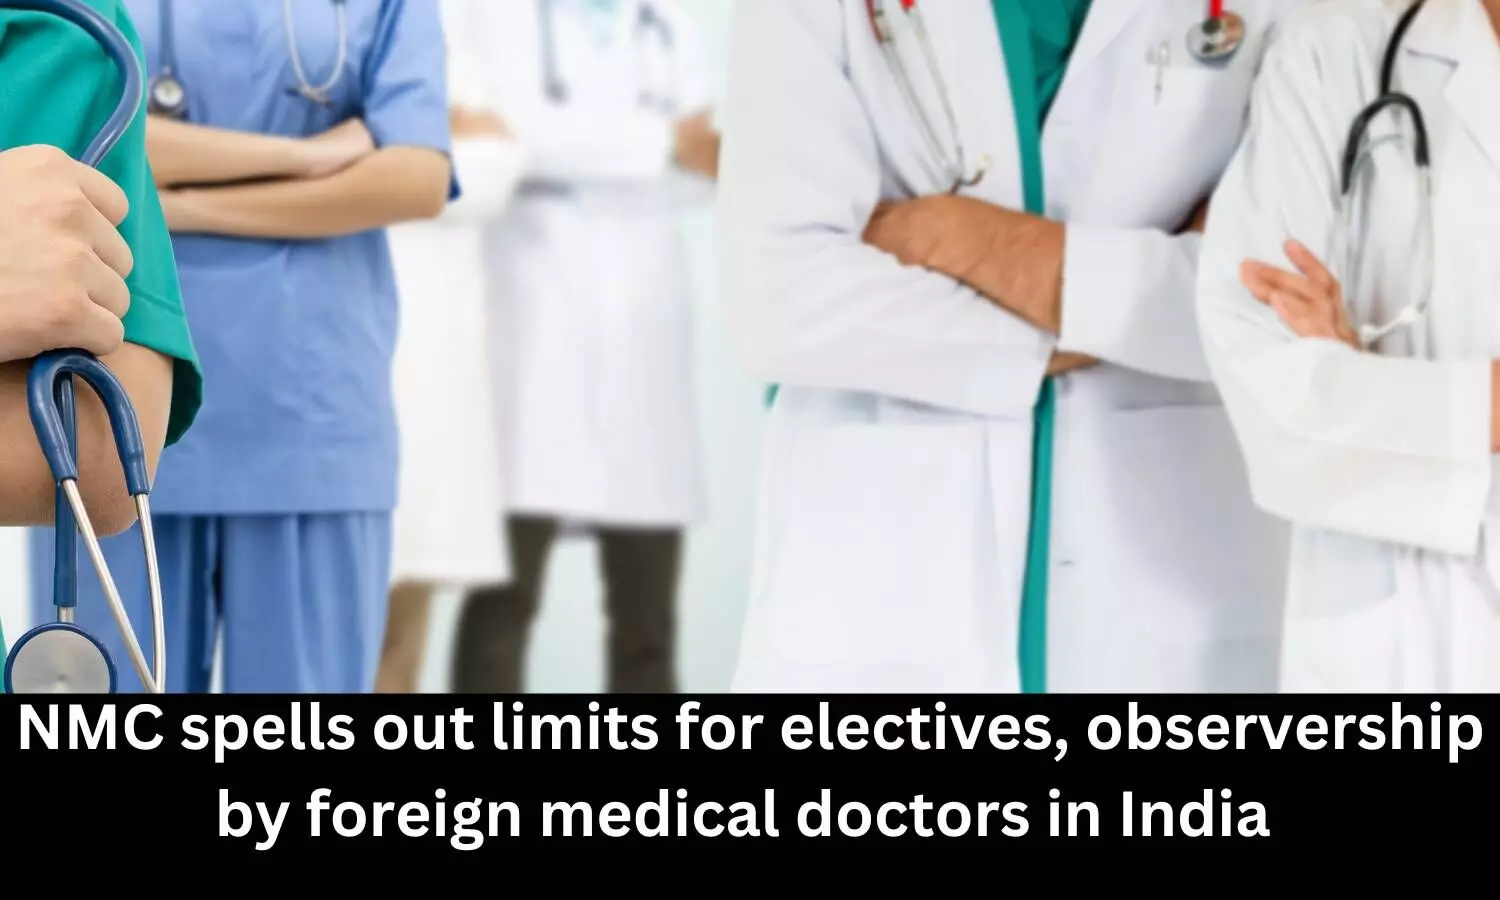 National Medical Commission spells out limits for electives, observership by foreign medical doctors in India